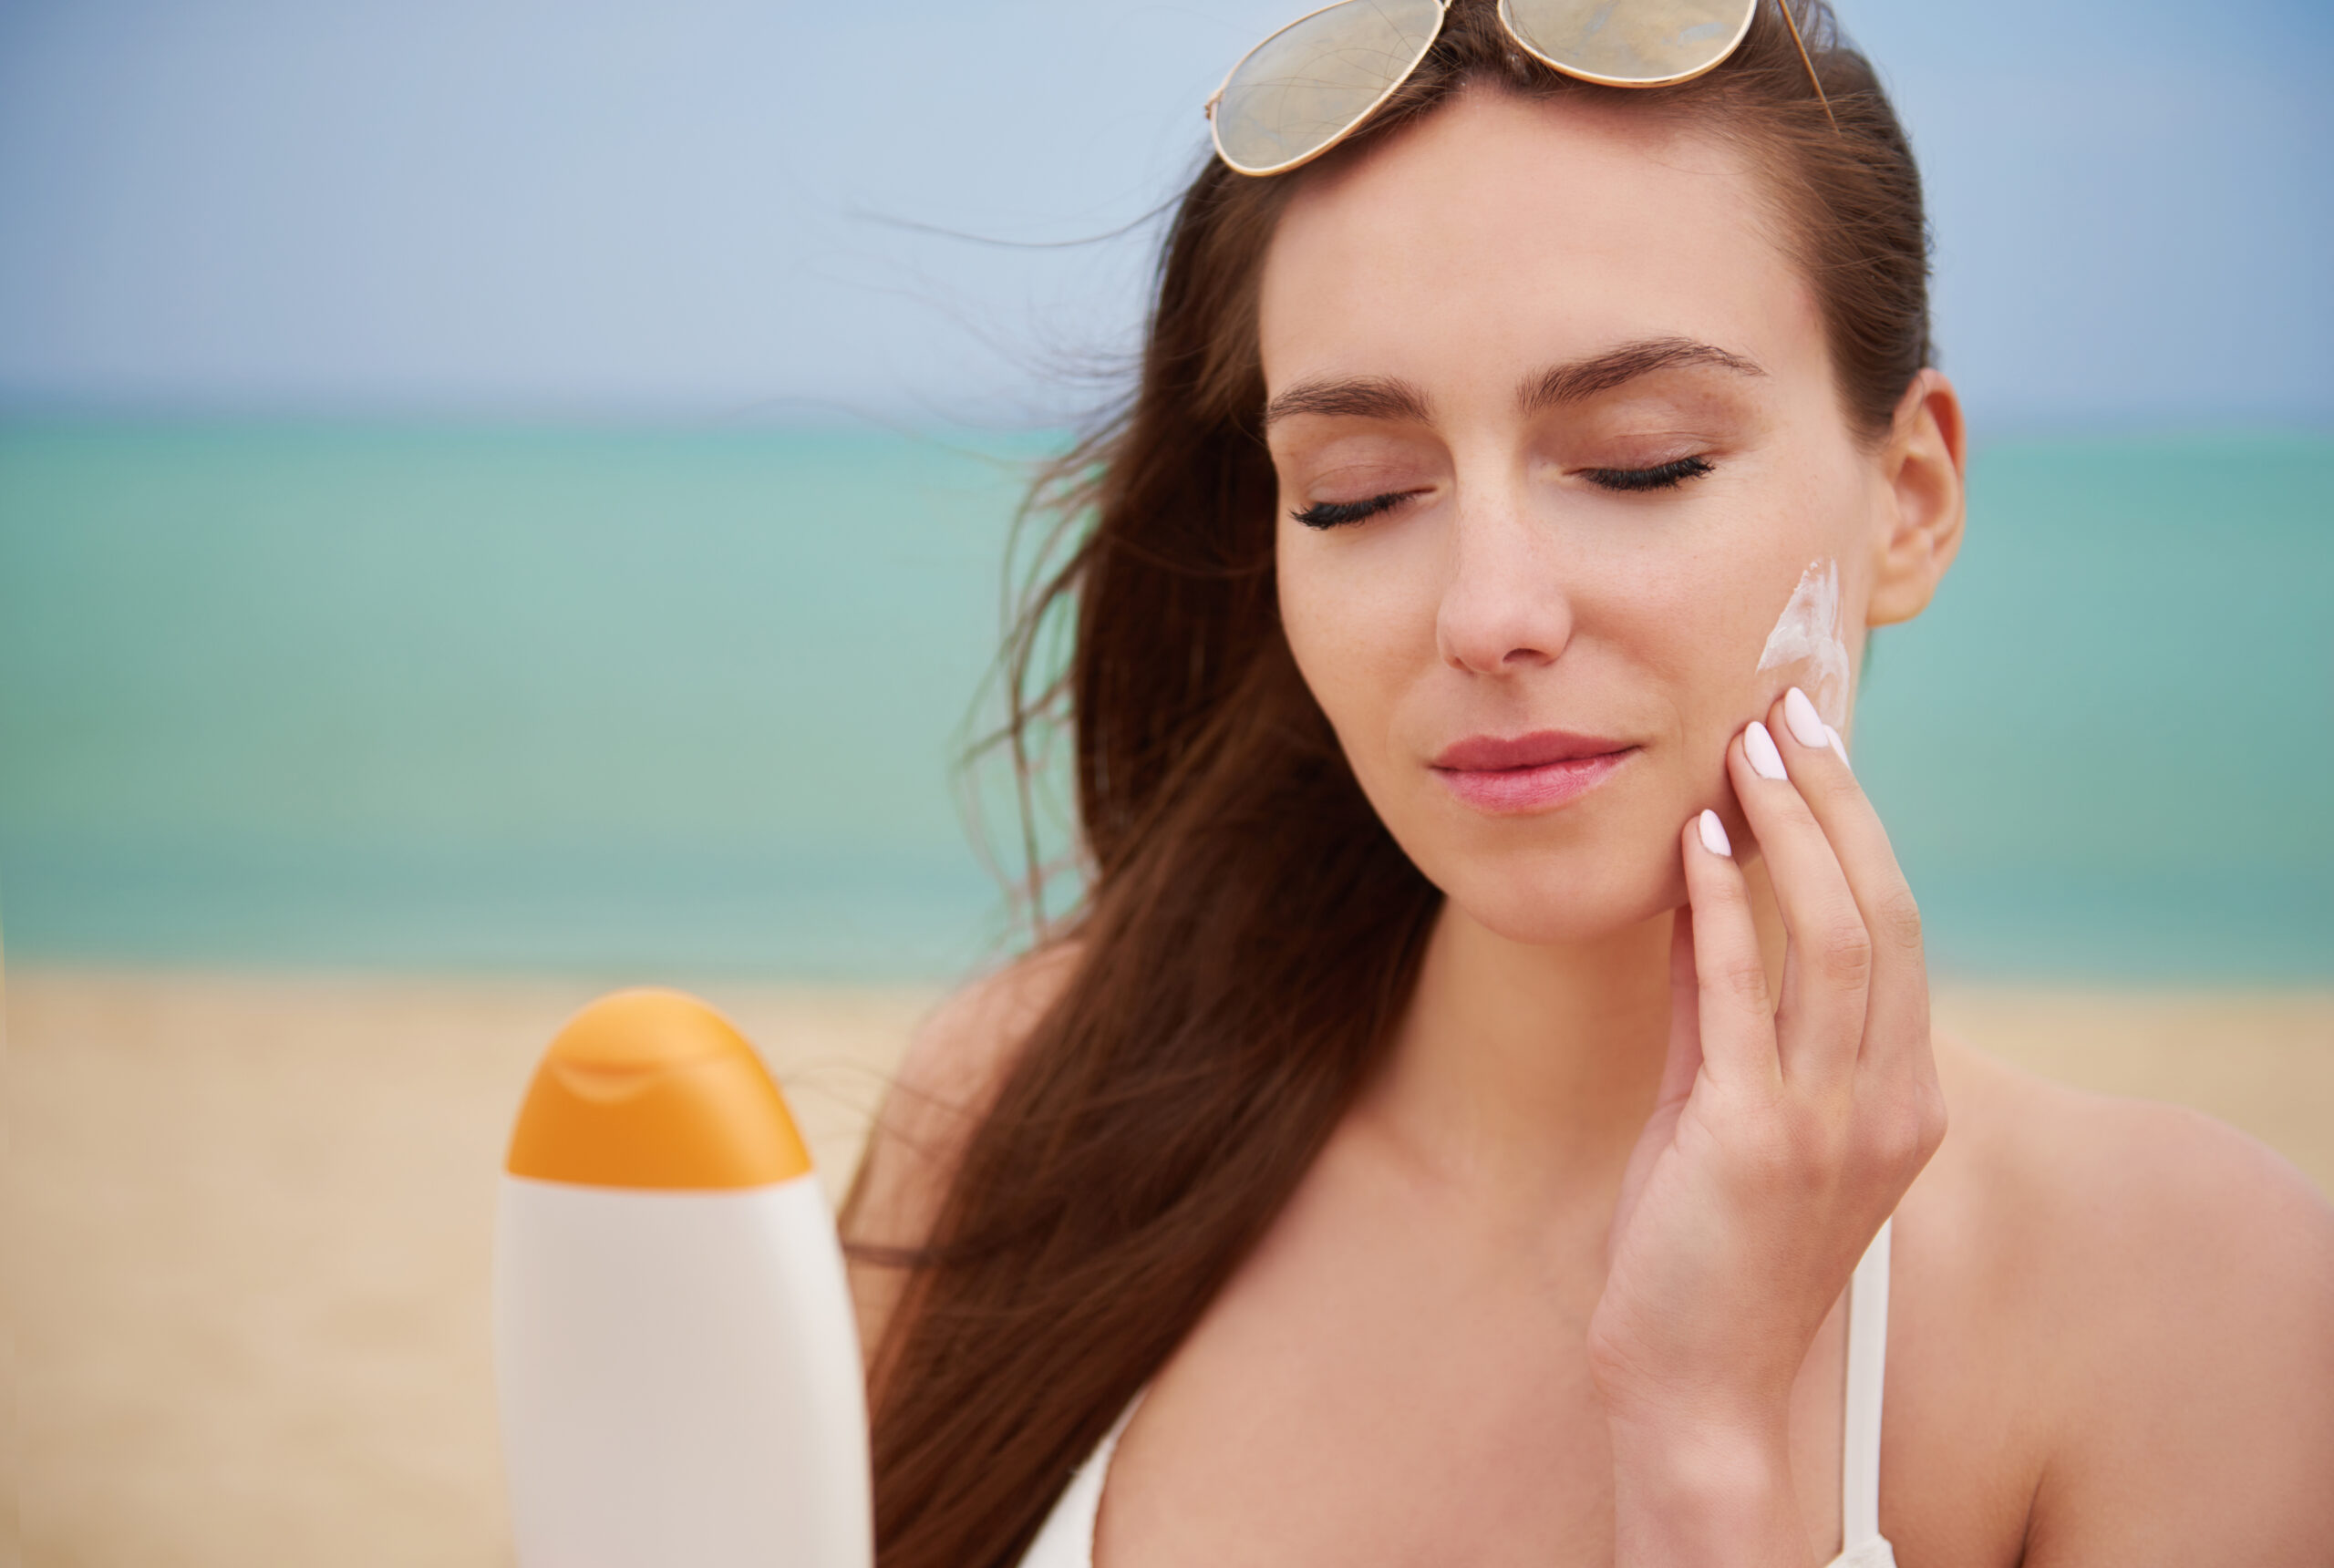 How to choose the right sunscreen for dry and sensitve skin? ☀️